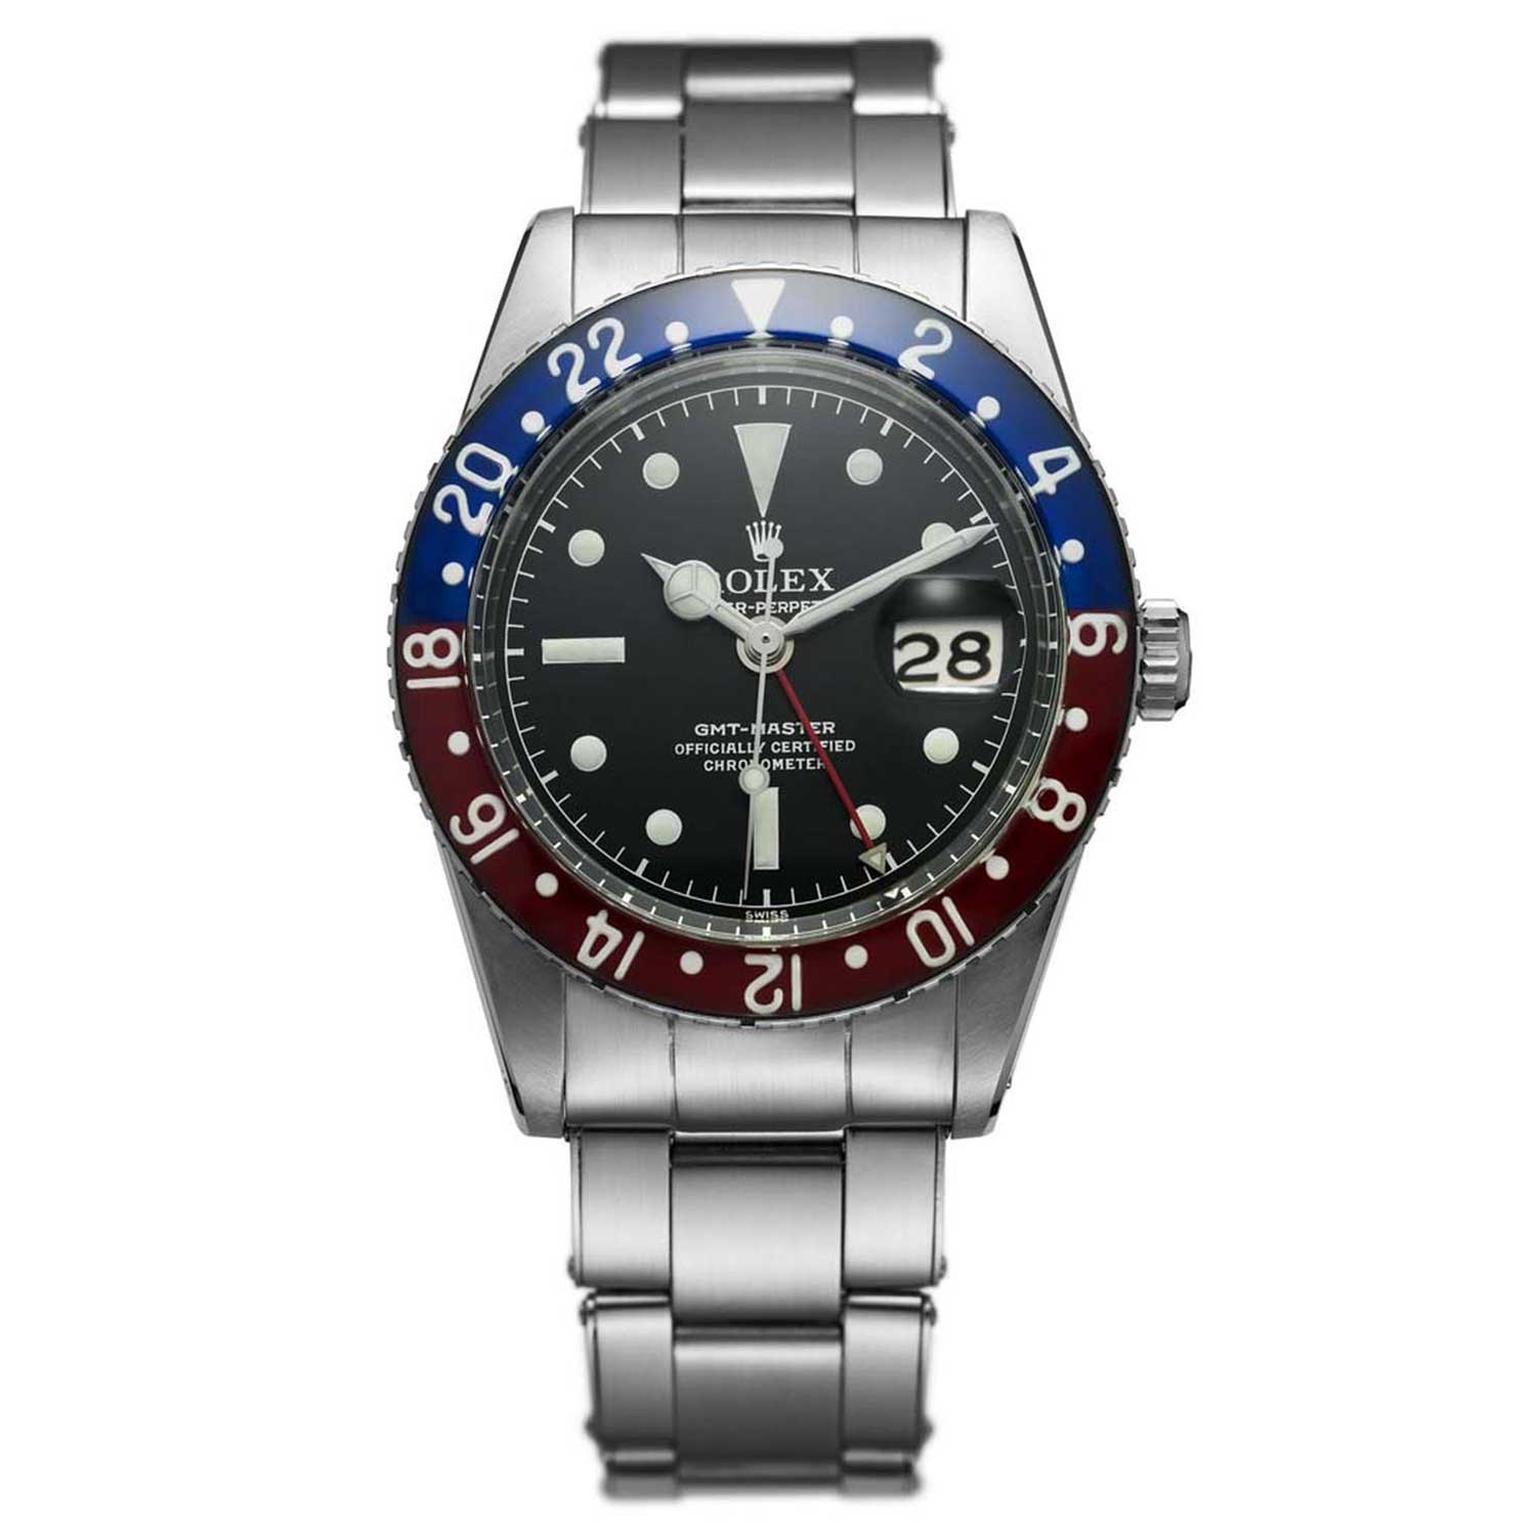 The Rolex GMT-Master Pepsi watch from 1955